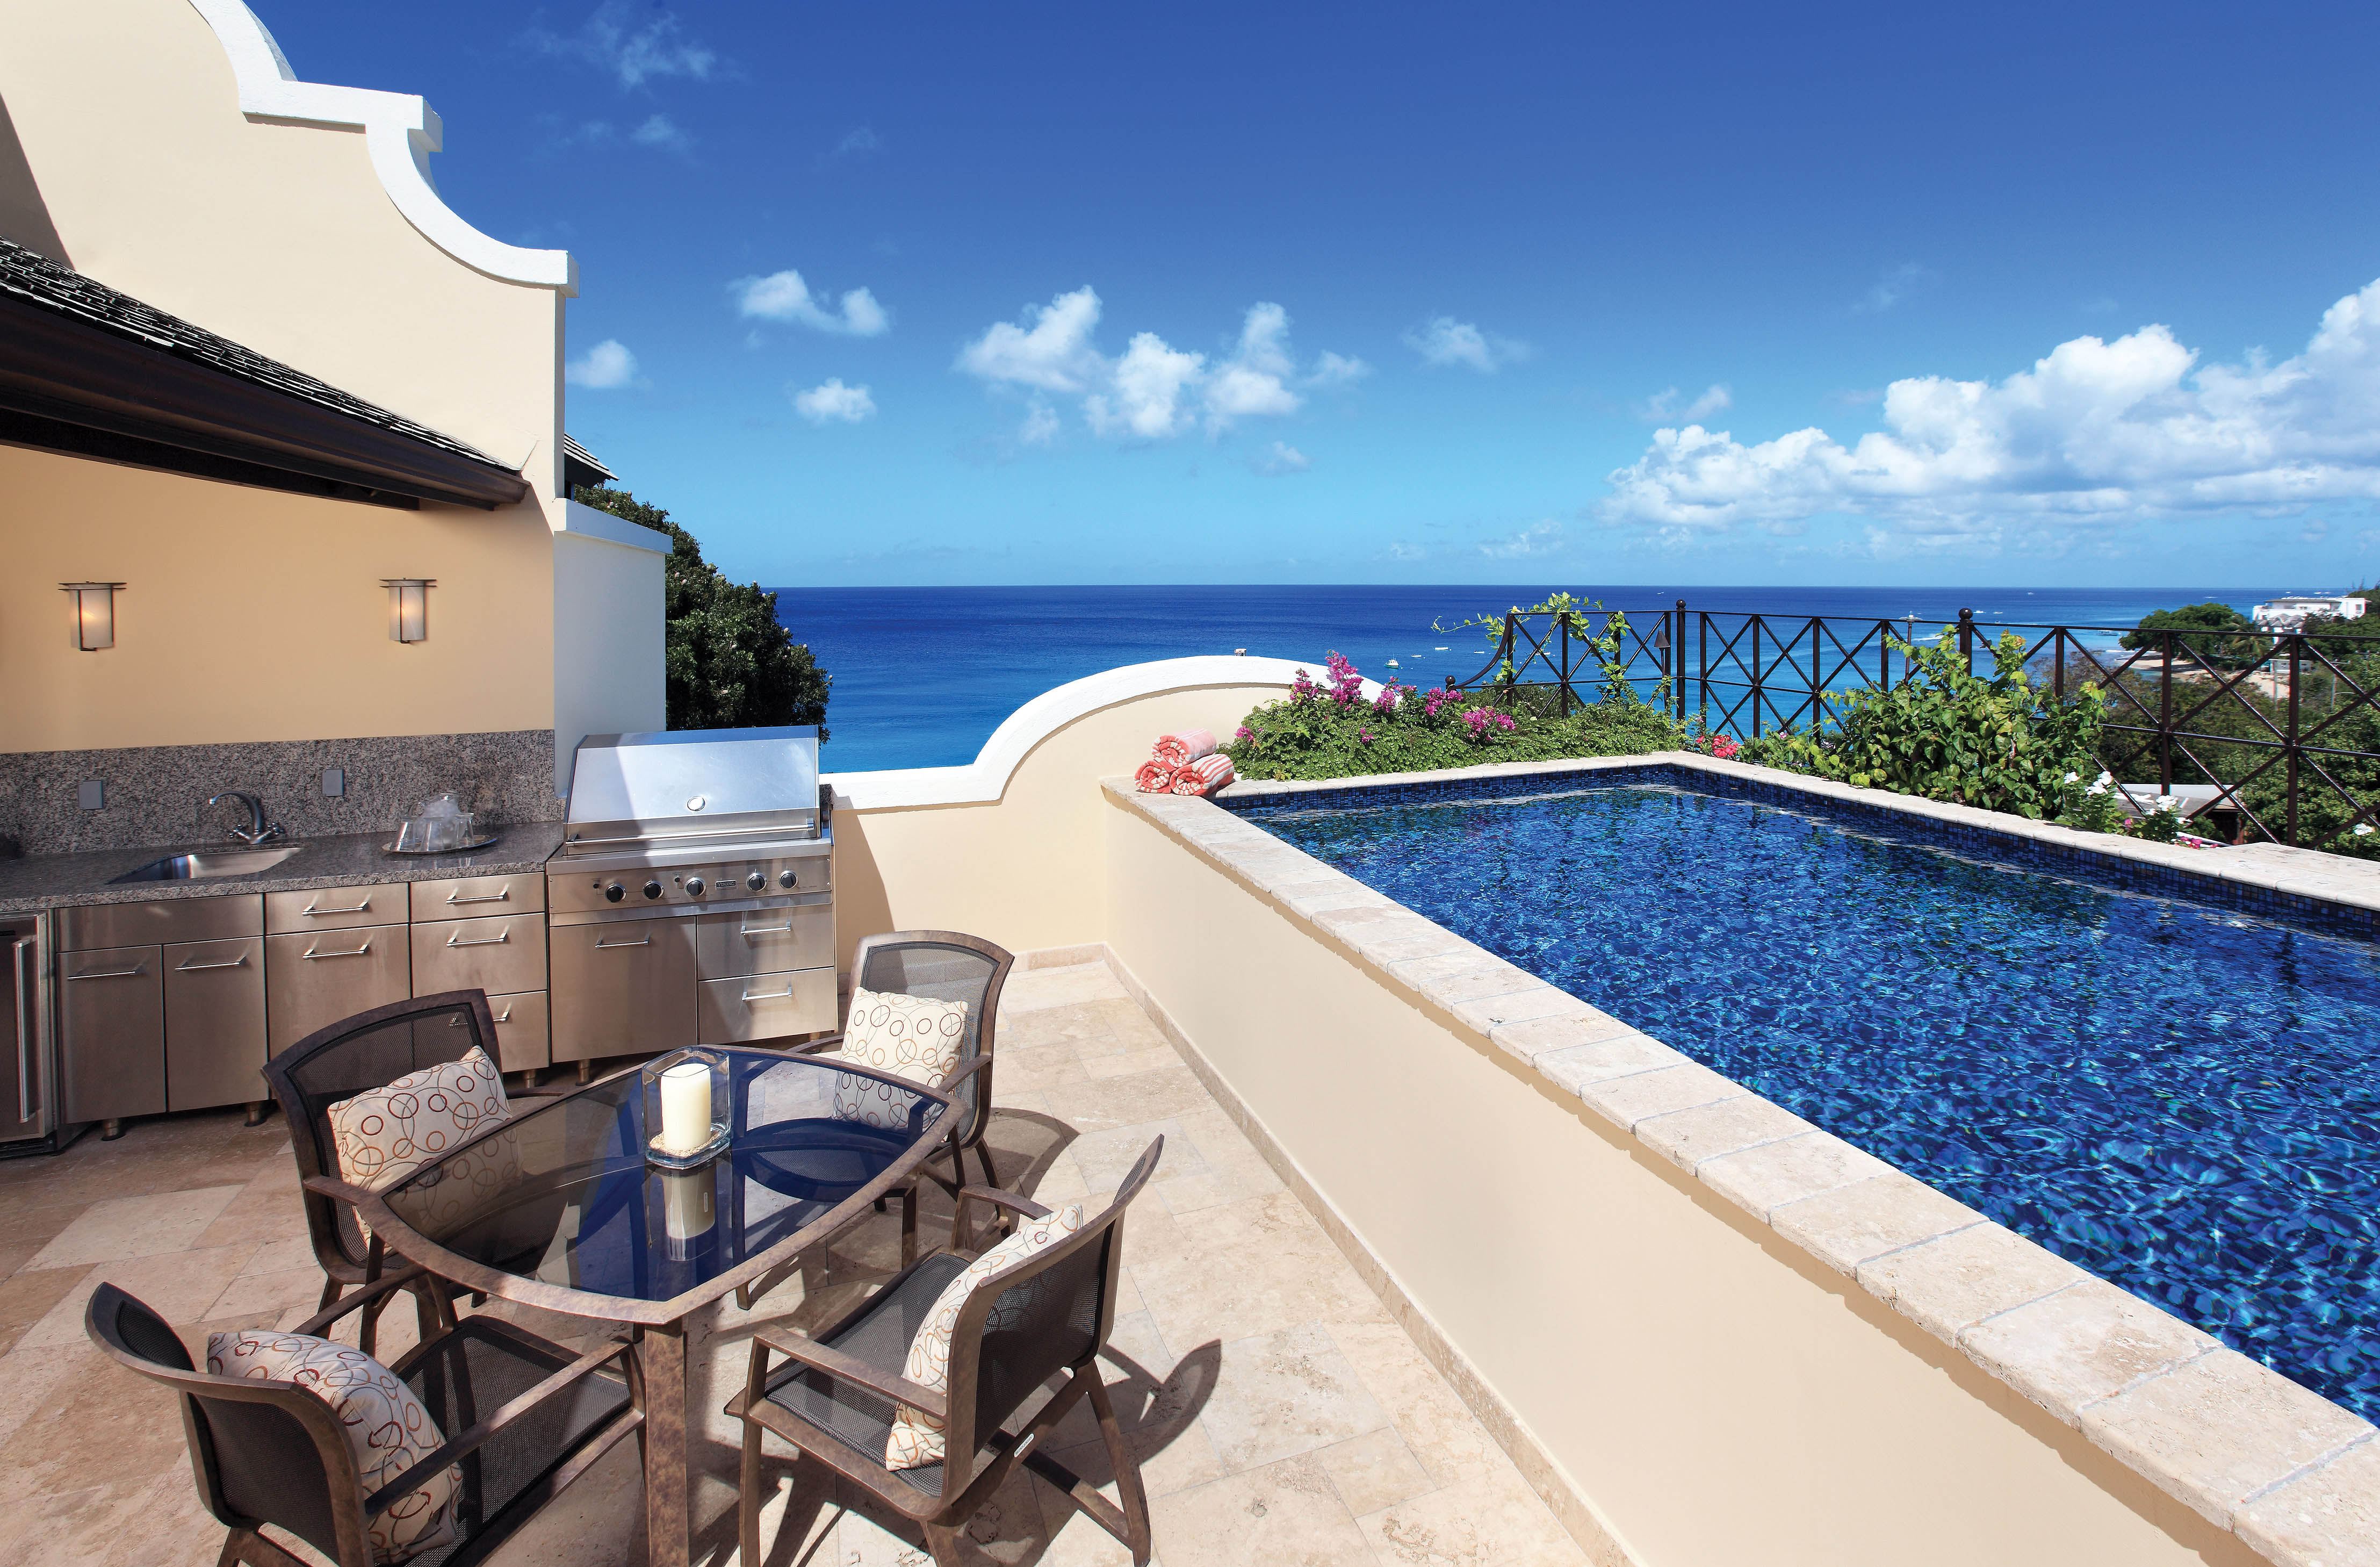 The Penthouse features a private pool and guests can also opt for a closer look at the Platinum Coast of Barbados on the Langara yacht.